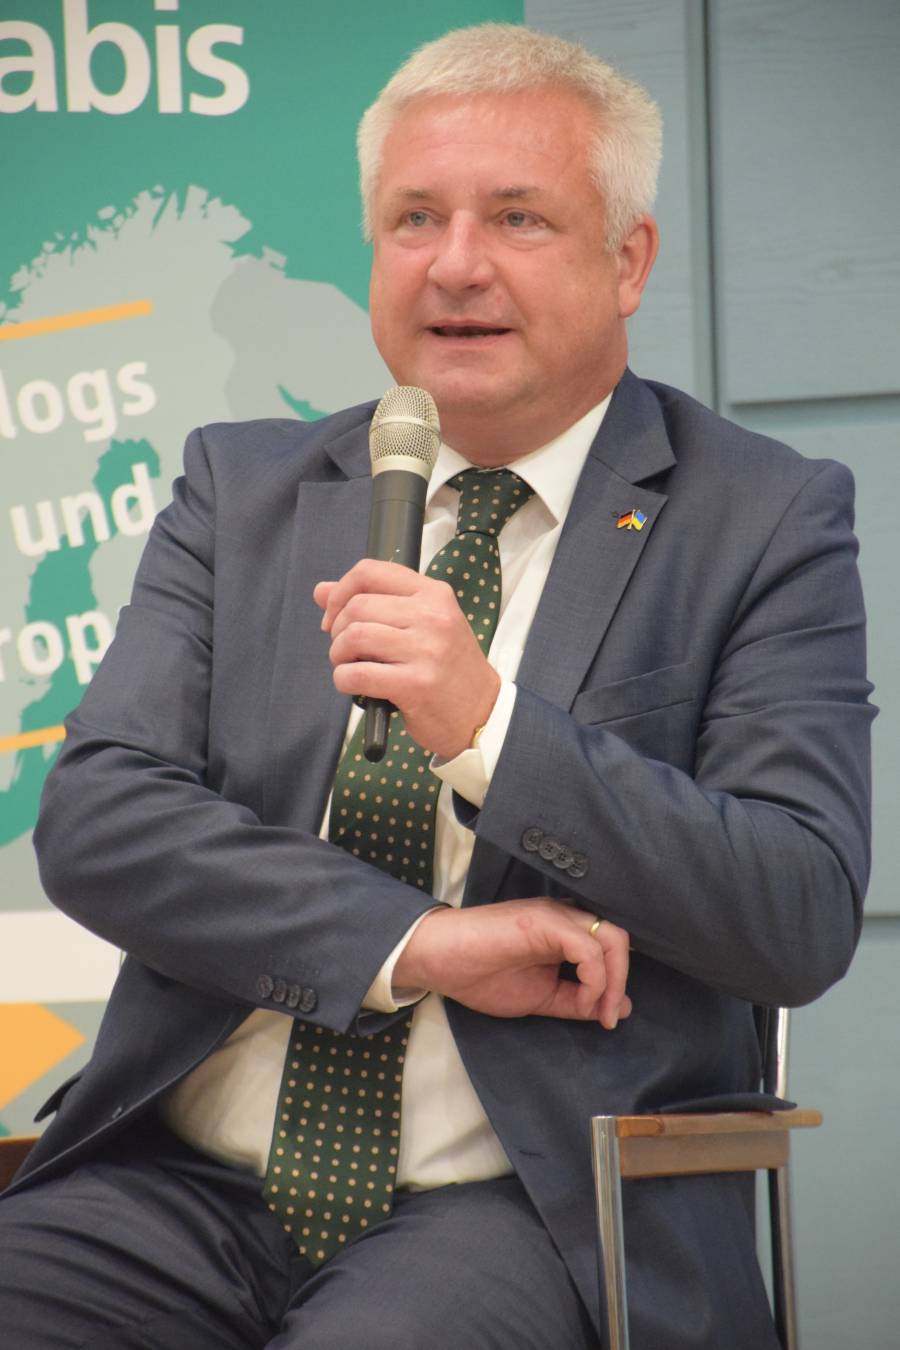 Knut Abraham is a member of the German Bundestag, spokesman for the CDU/CSU parliamentary group in the Committee on Human Rights and Humanitarian Aid and a member of the Executive Committee of the Pan-European Union Germany.<br><small class="stackrow__imagesource">Source: Renovabis </small>